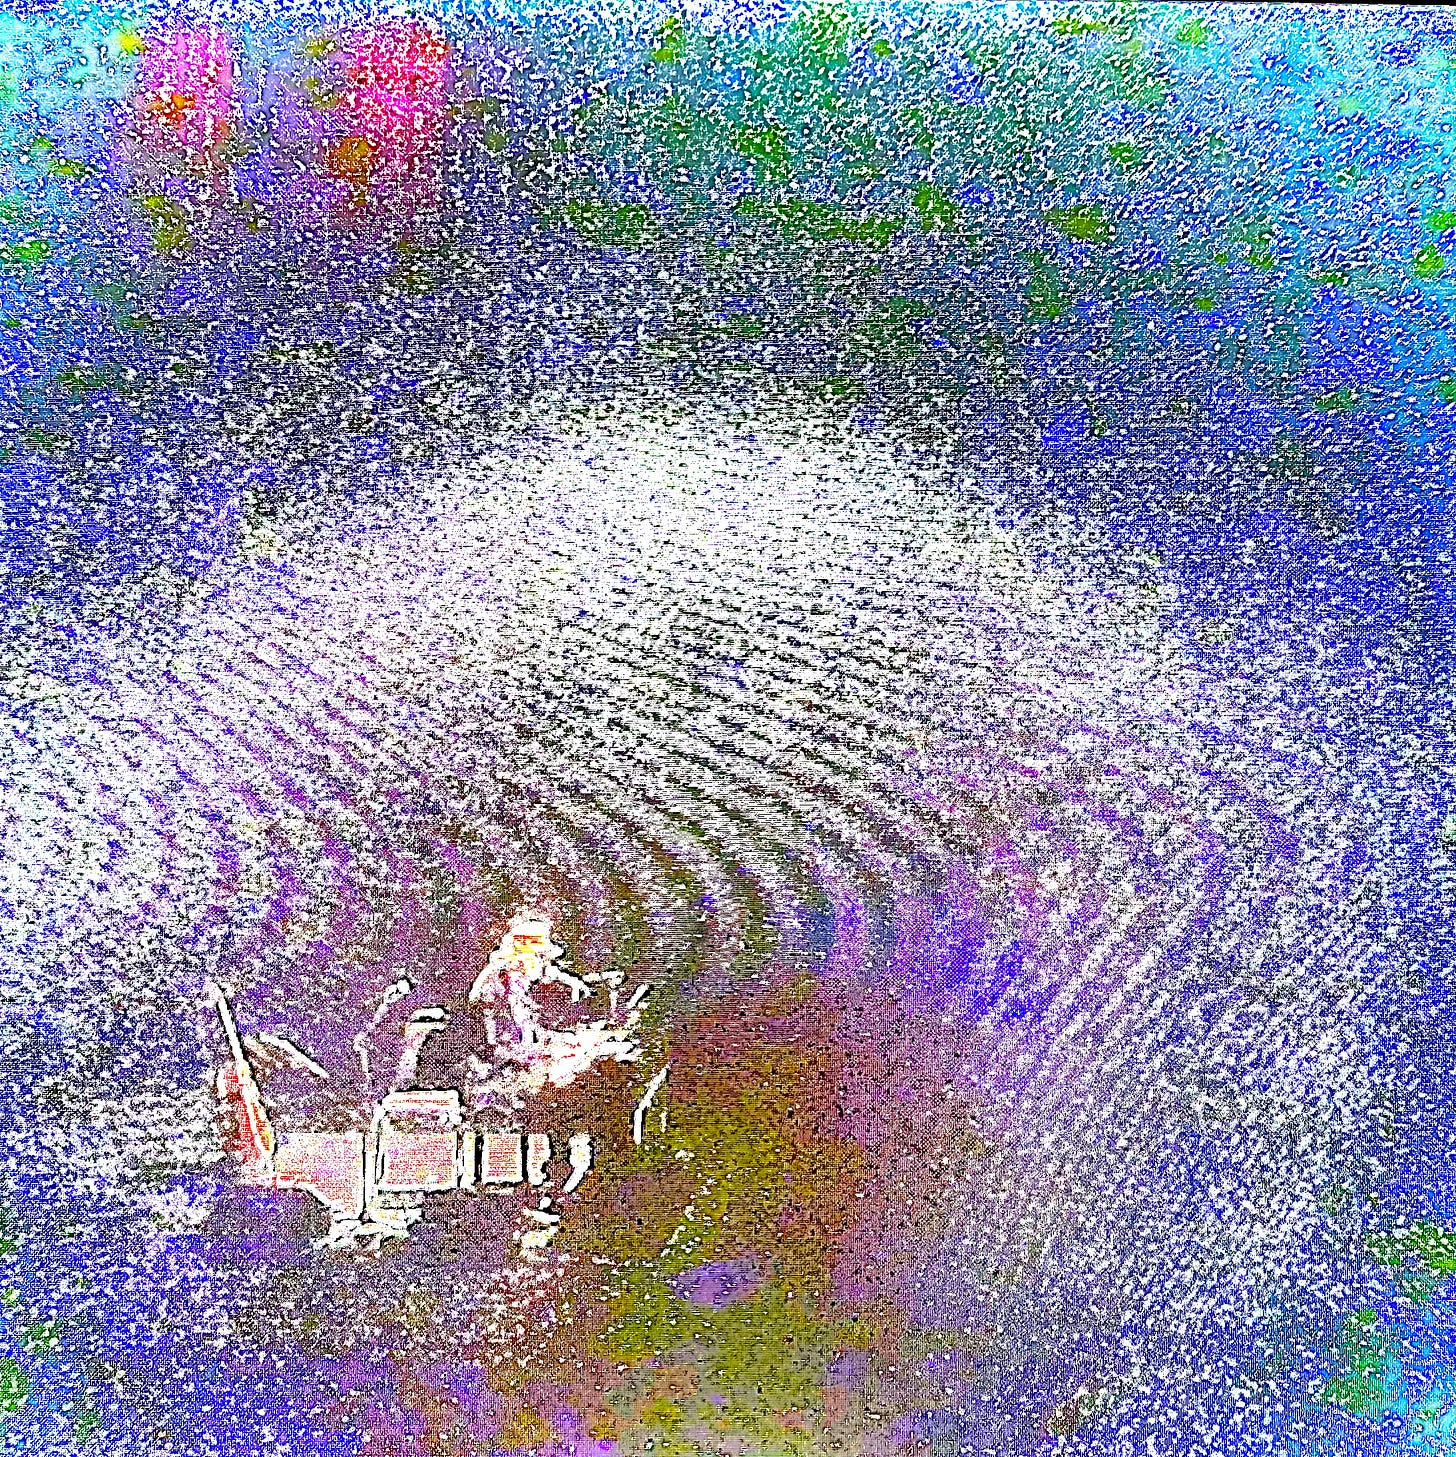 Scott McCaughey performs on piano in a photo with many digital artifacts and colorful distortion